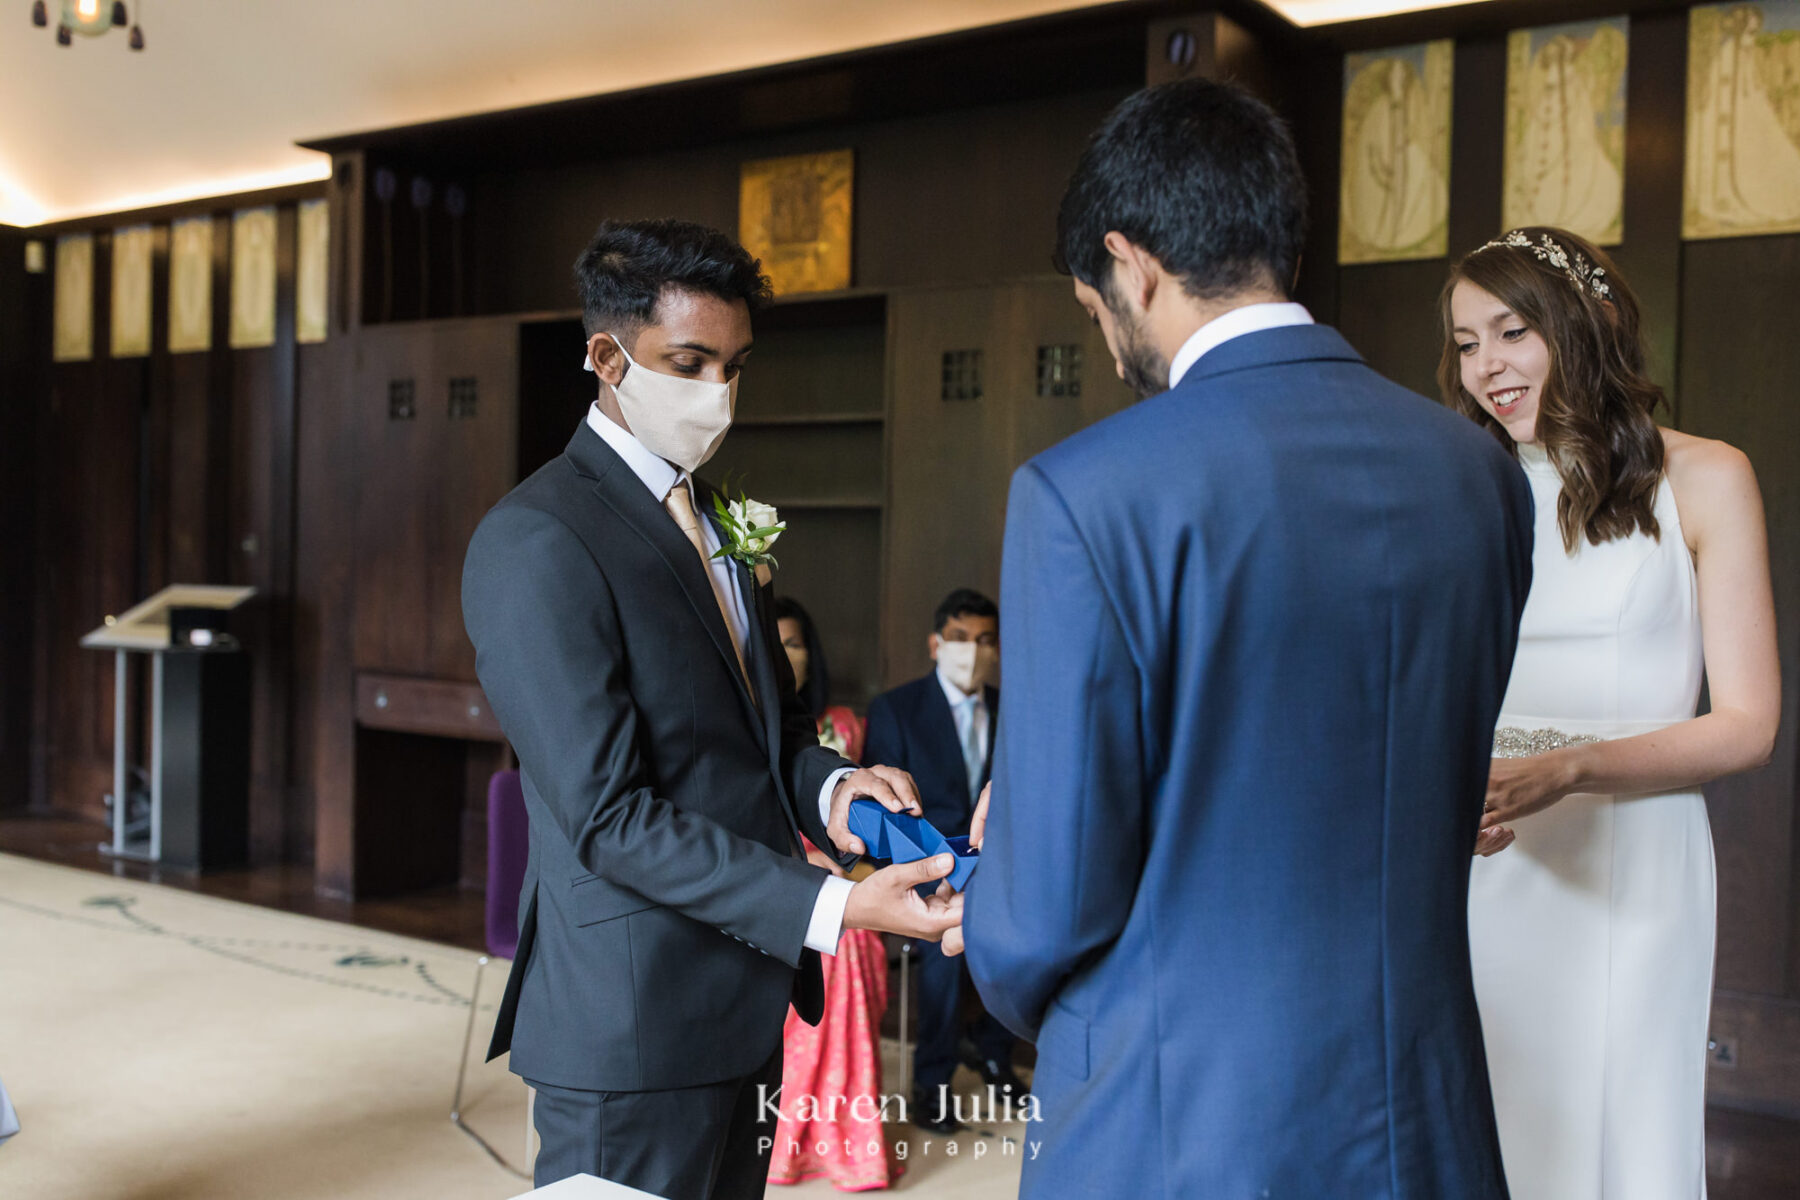 best man delivers rings to bride and groom during wedding ceremony at House for an Art Lover